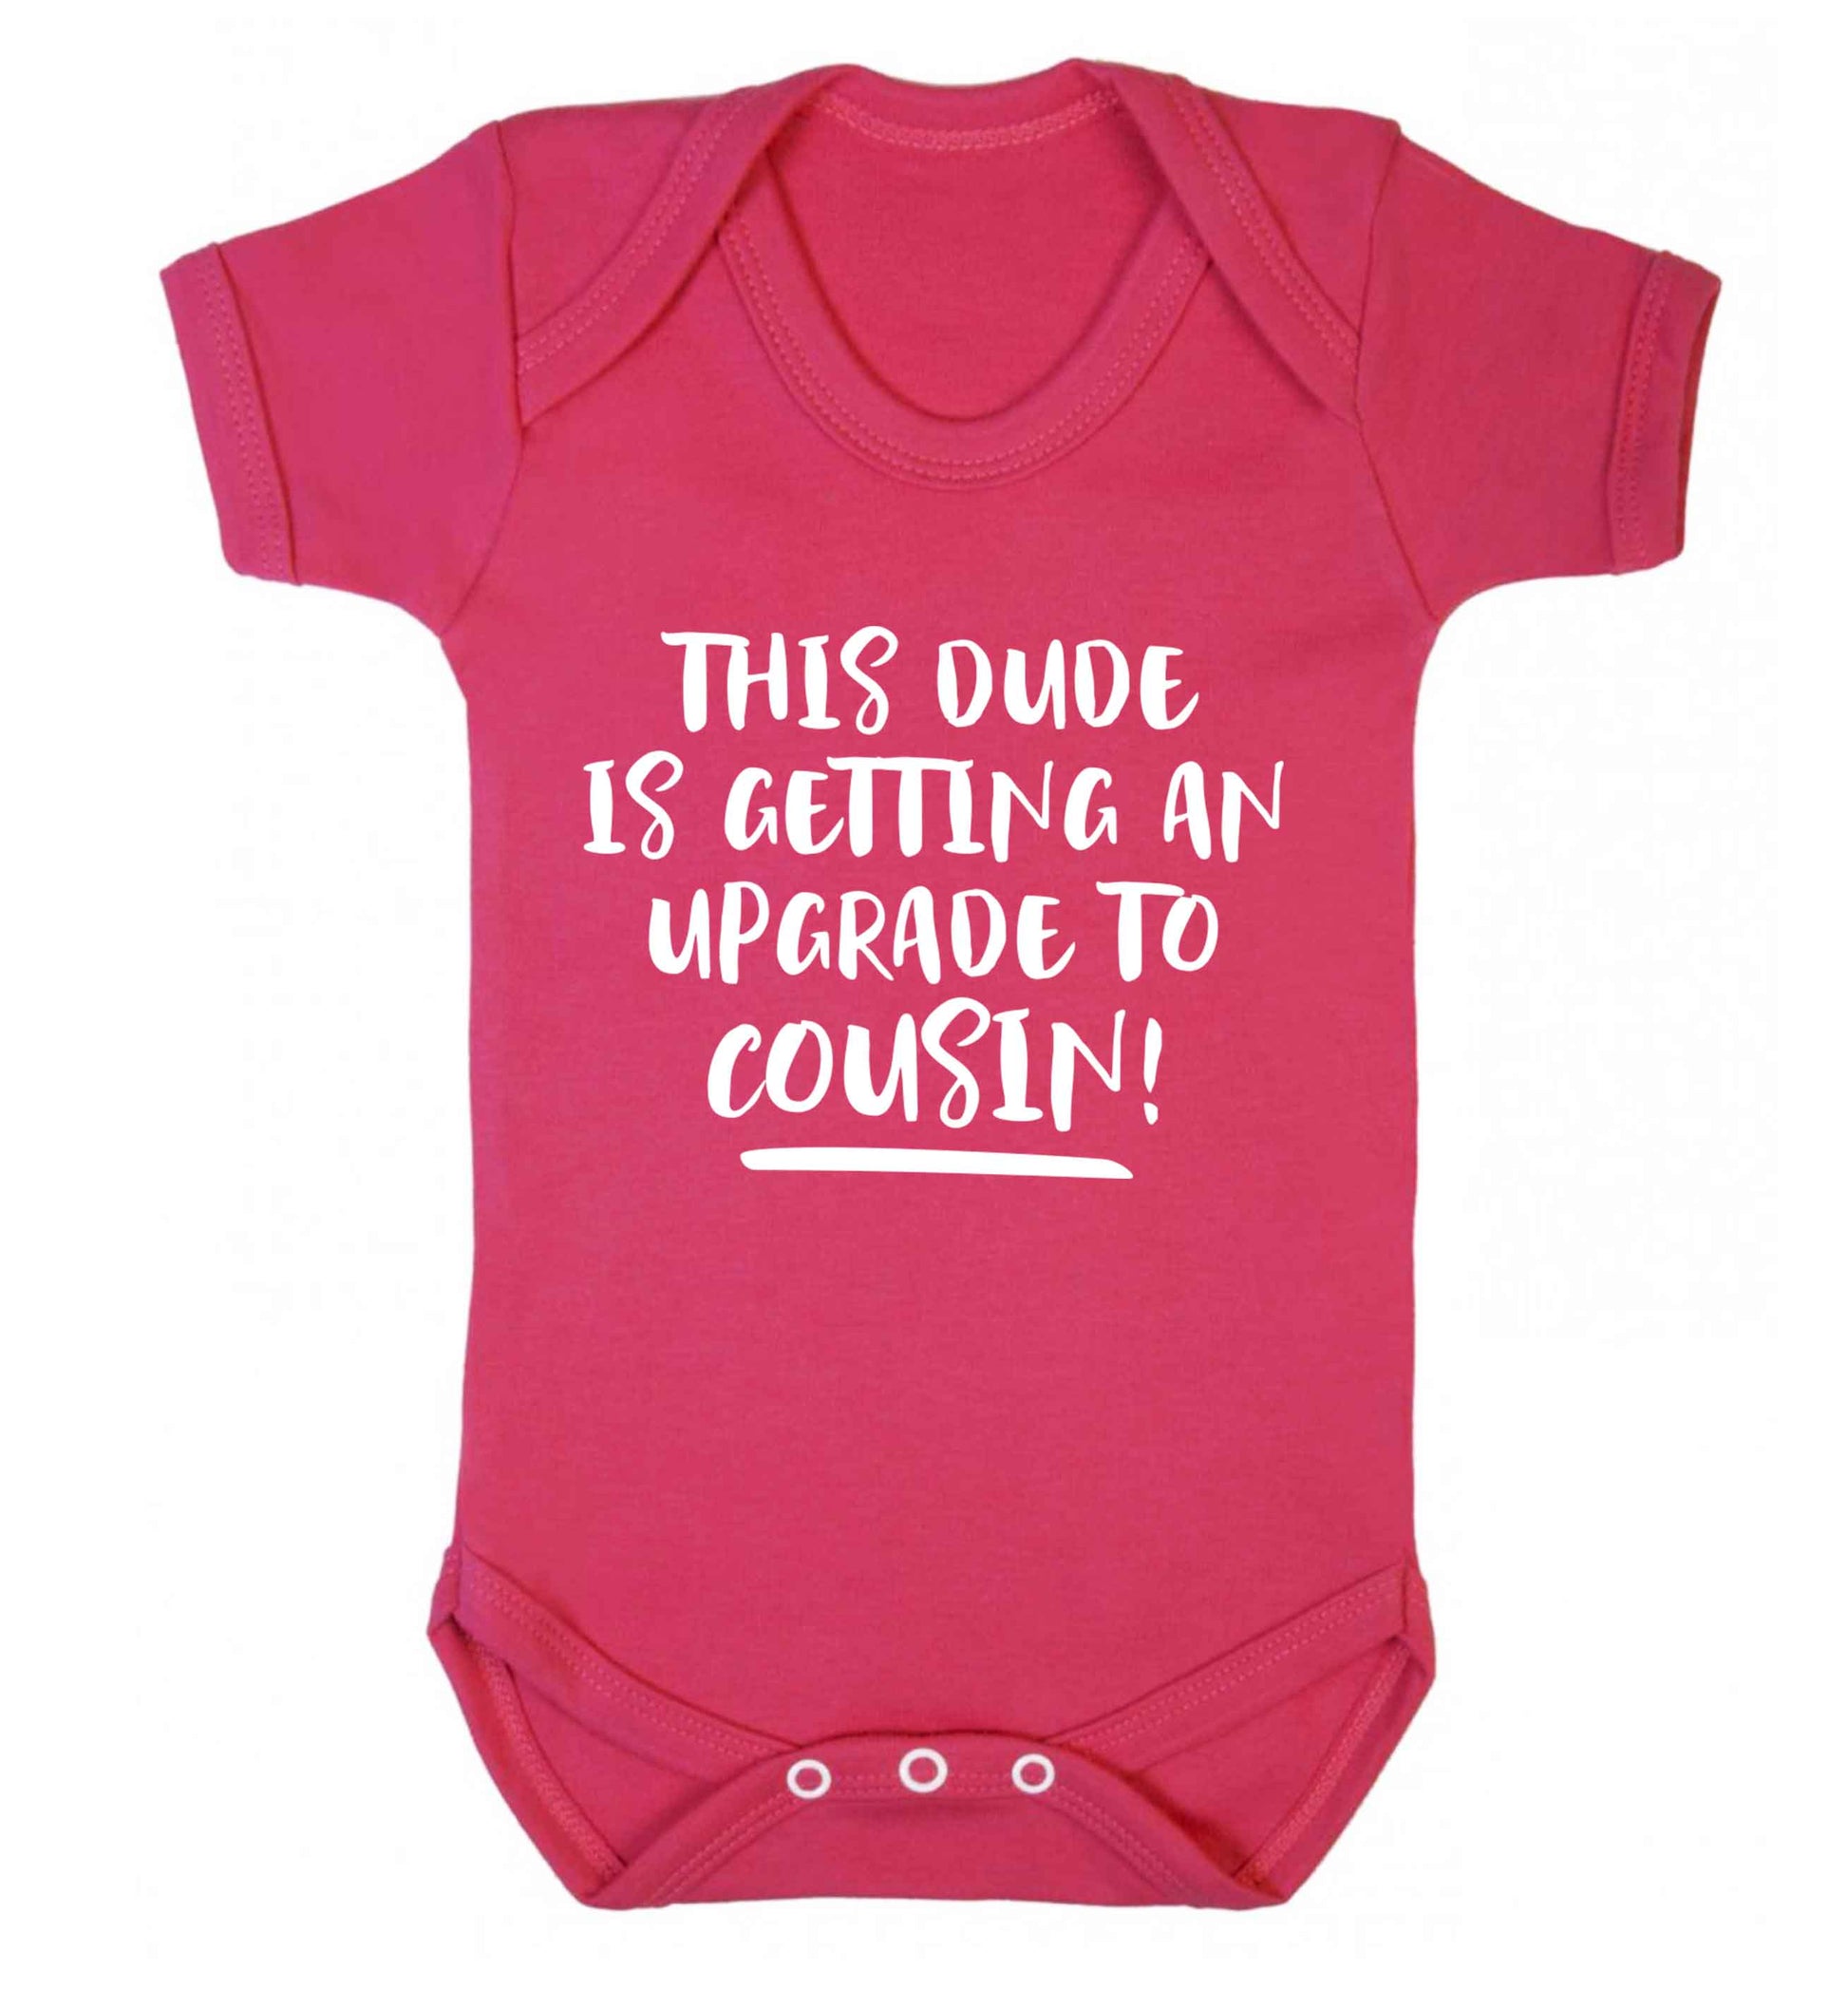 This dude is getting an upgrade to cousin! Baby Vest dark pink 18-24 months